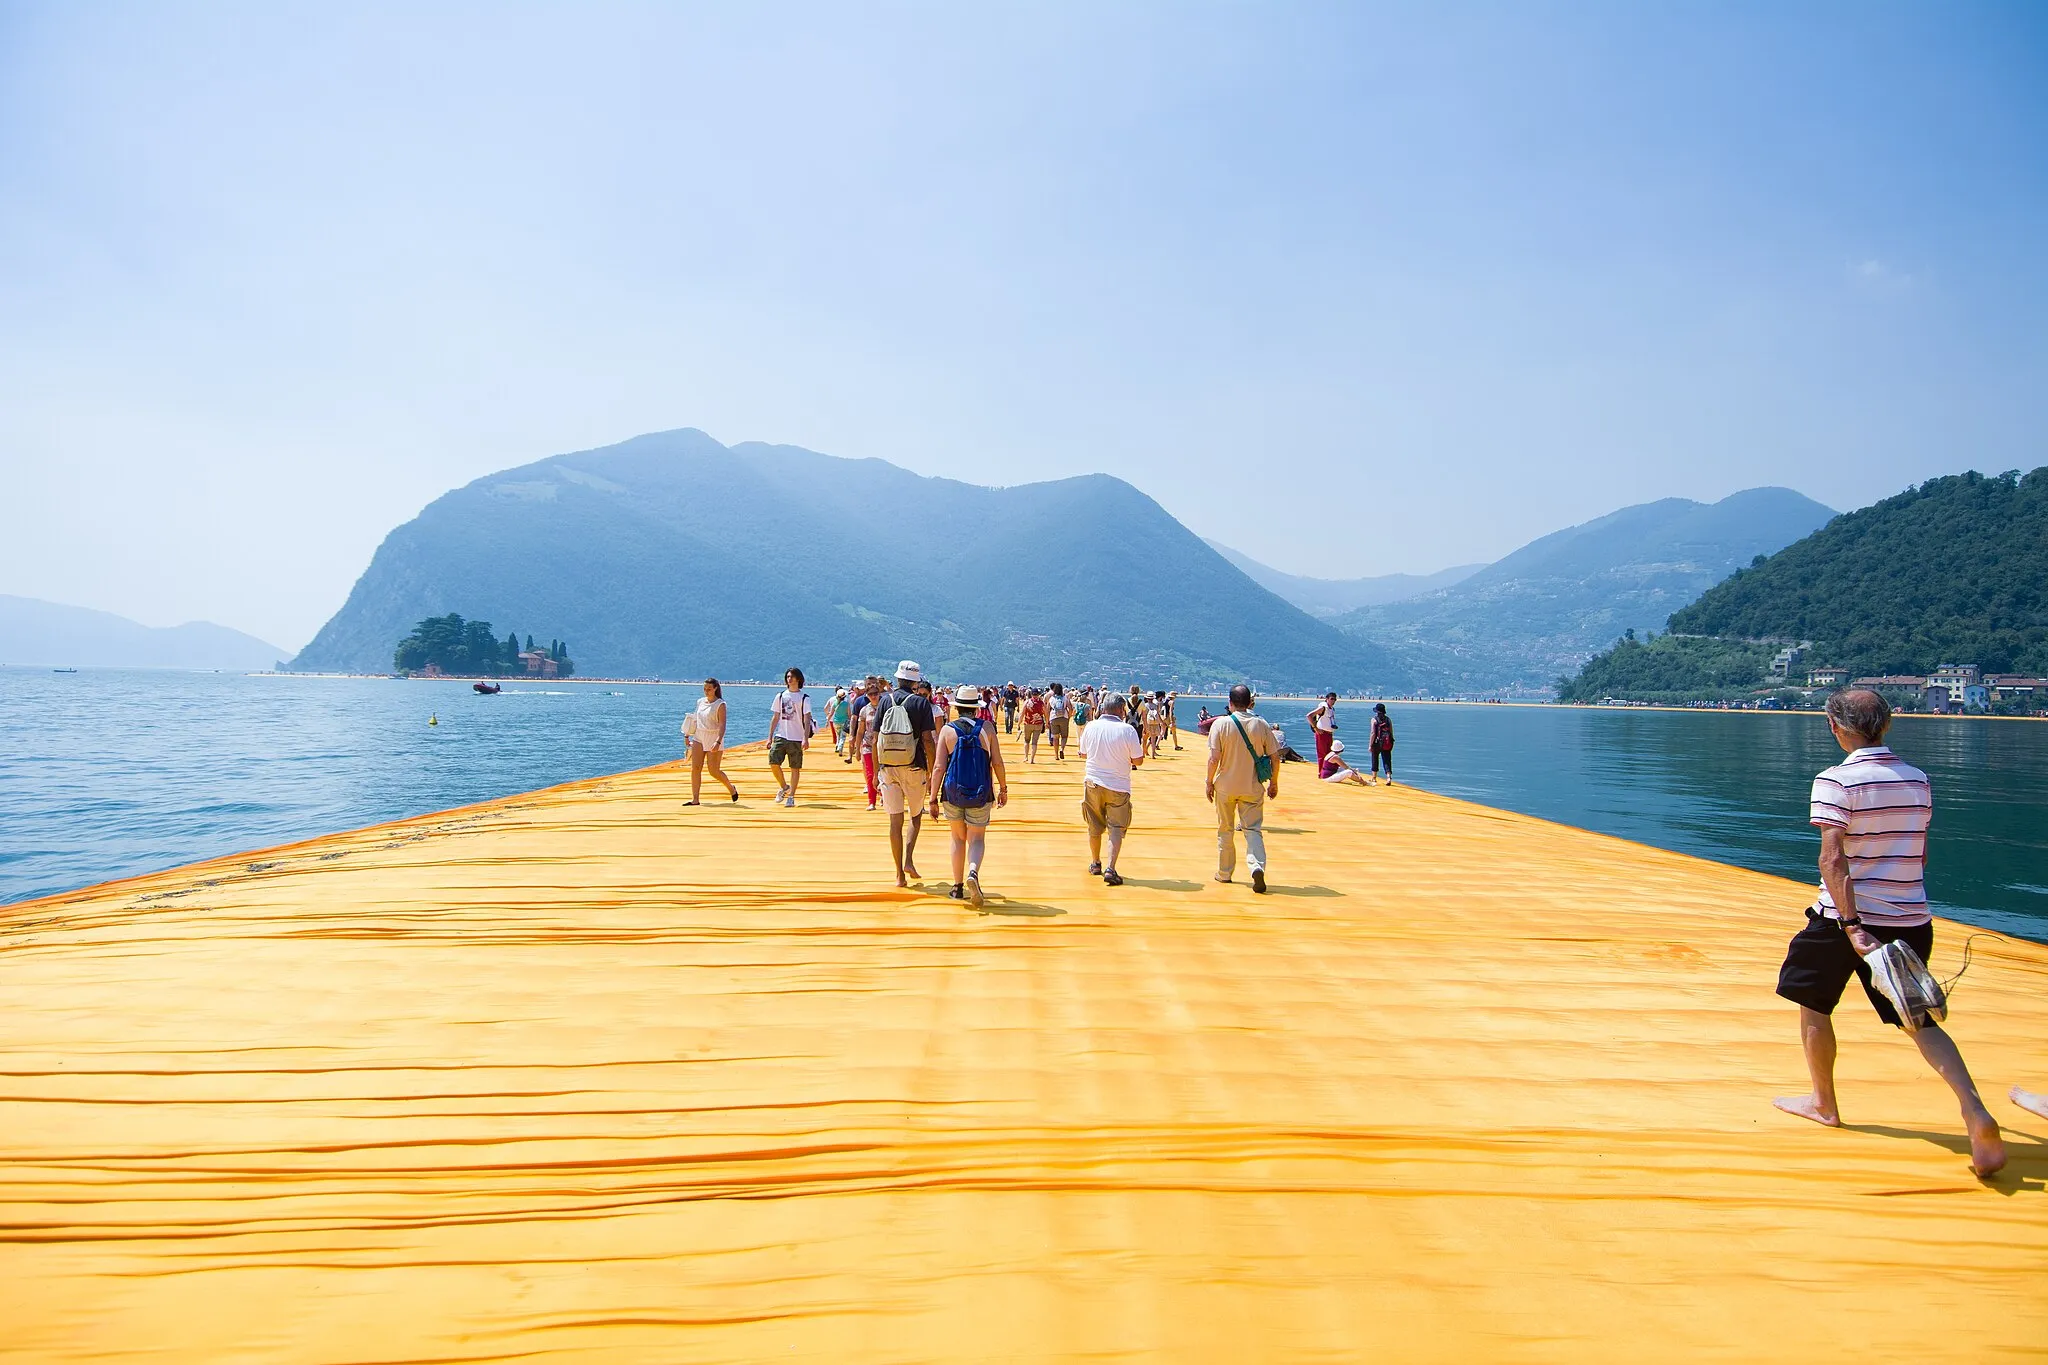 Photo showing: Part of an art installation at Lake Iseo created by Christo and Jeanne Claude.